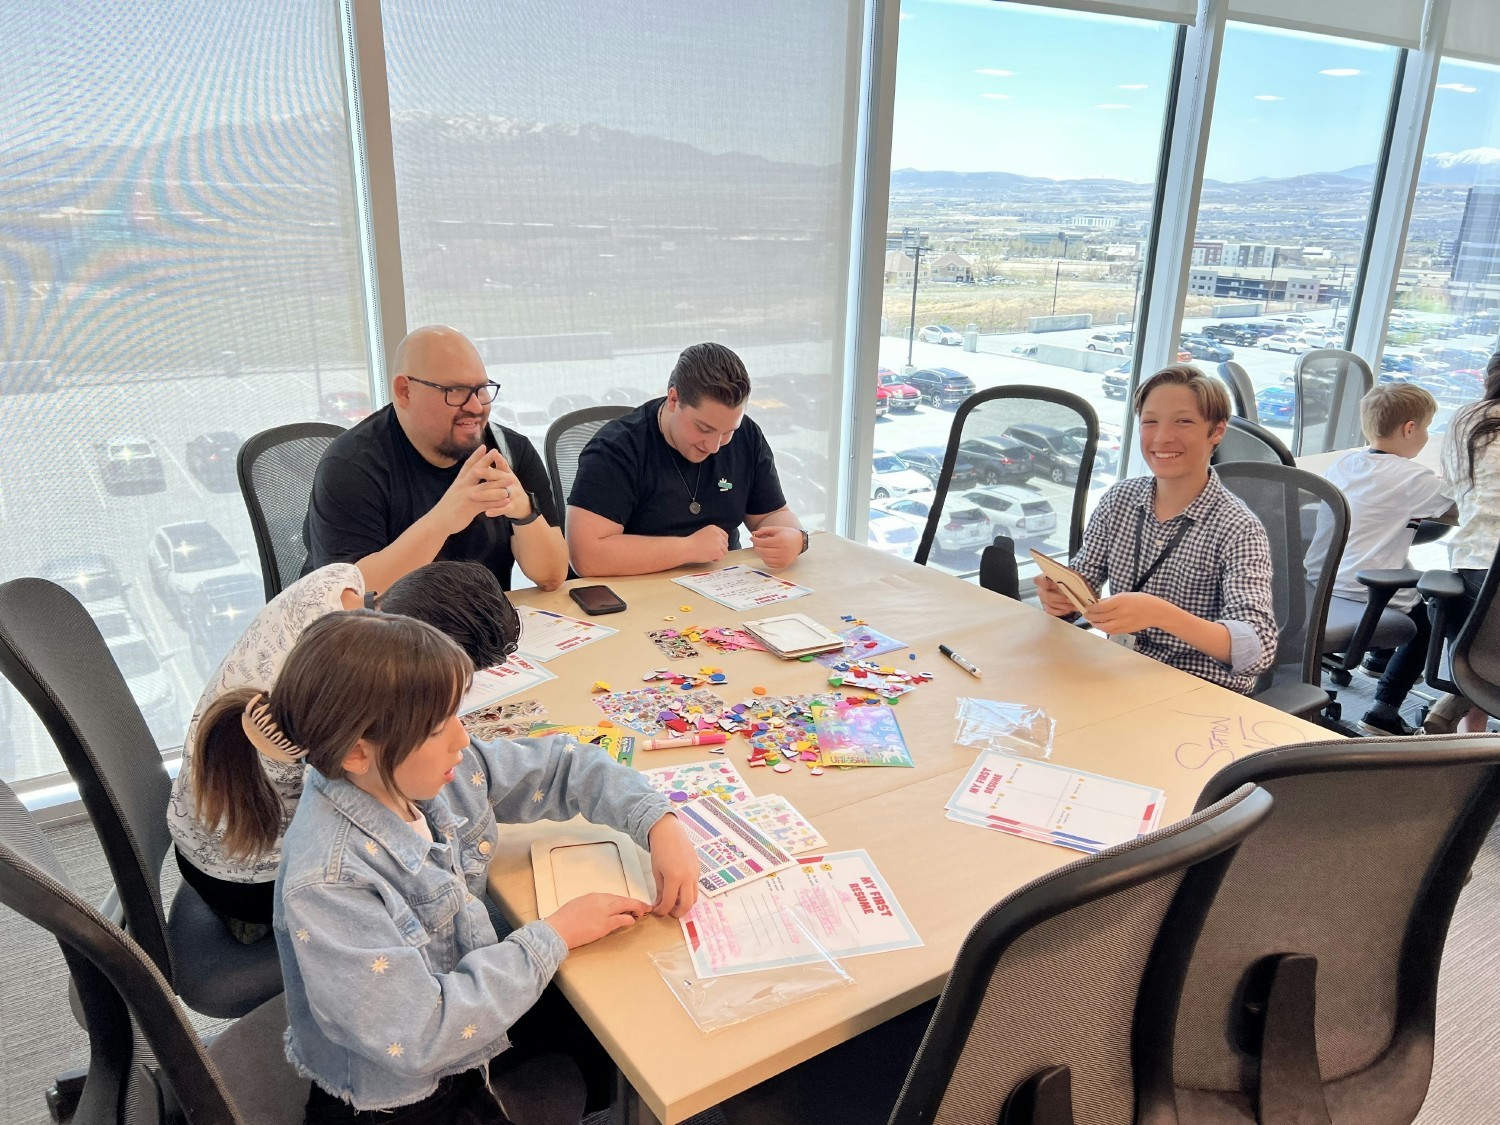 Utah employees and their families during our annual “Bring Your Child to Work” day event